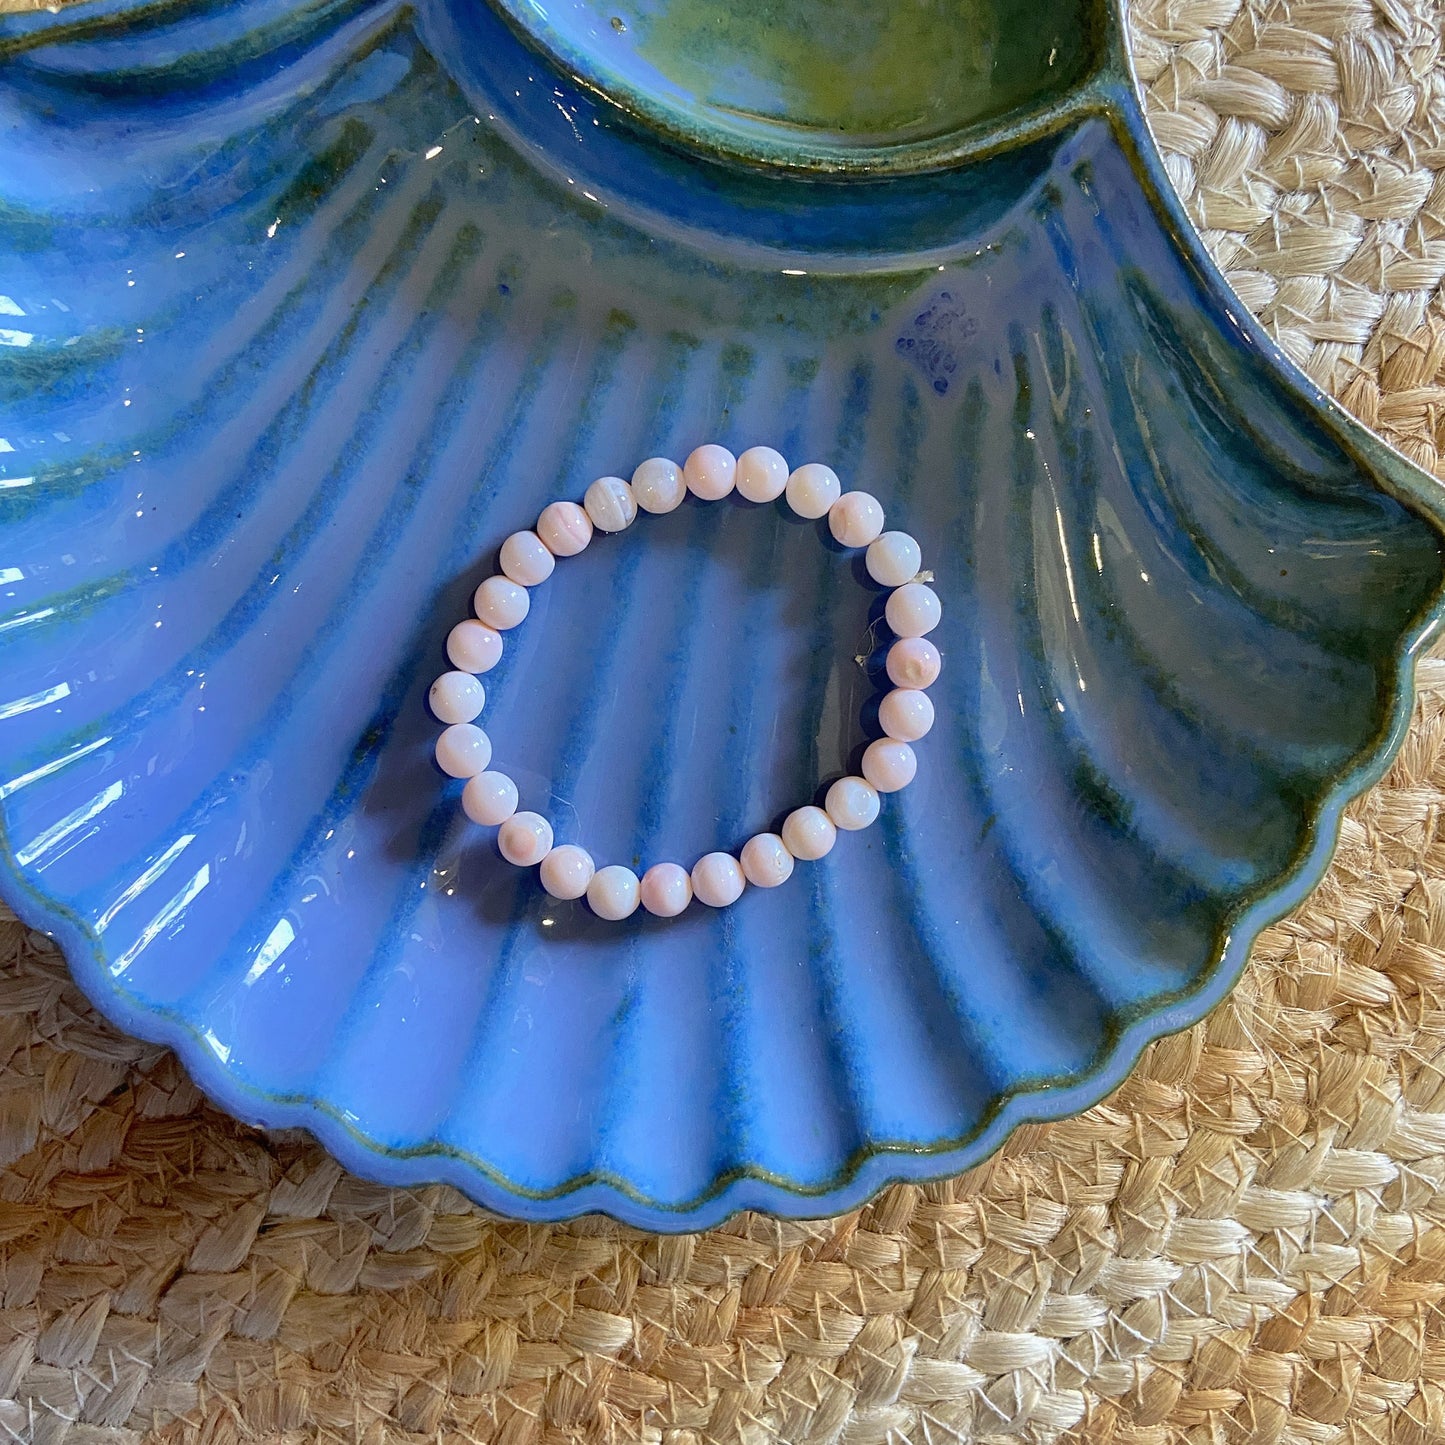 Pink Opal Bead Bracelet | Sooth Anxiety